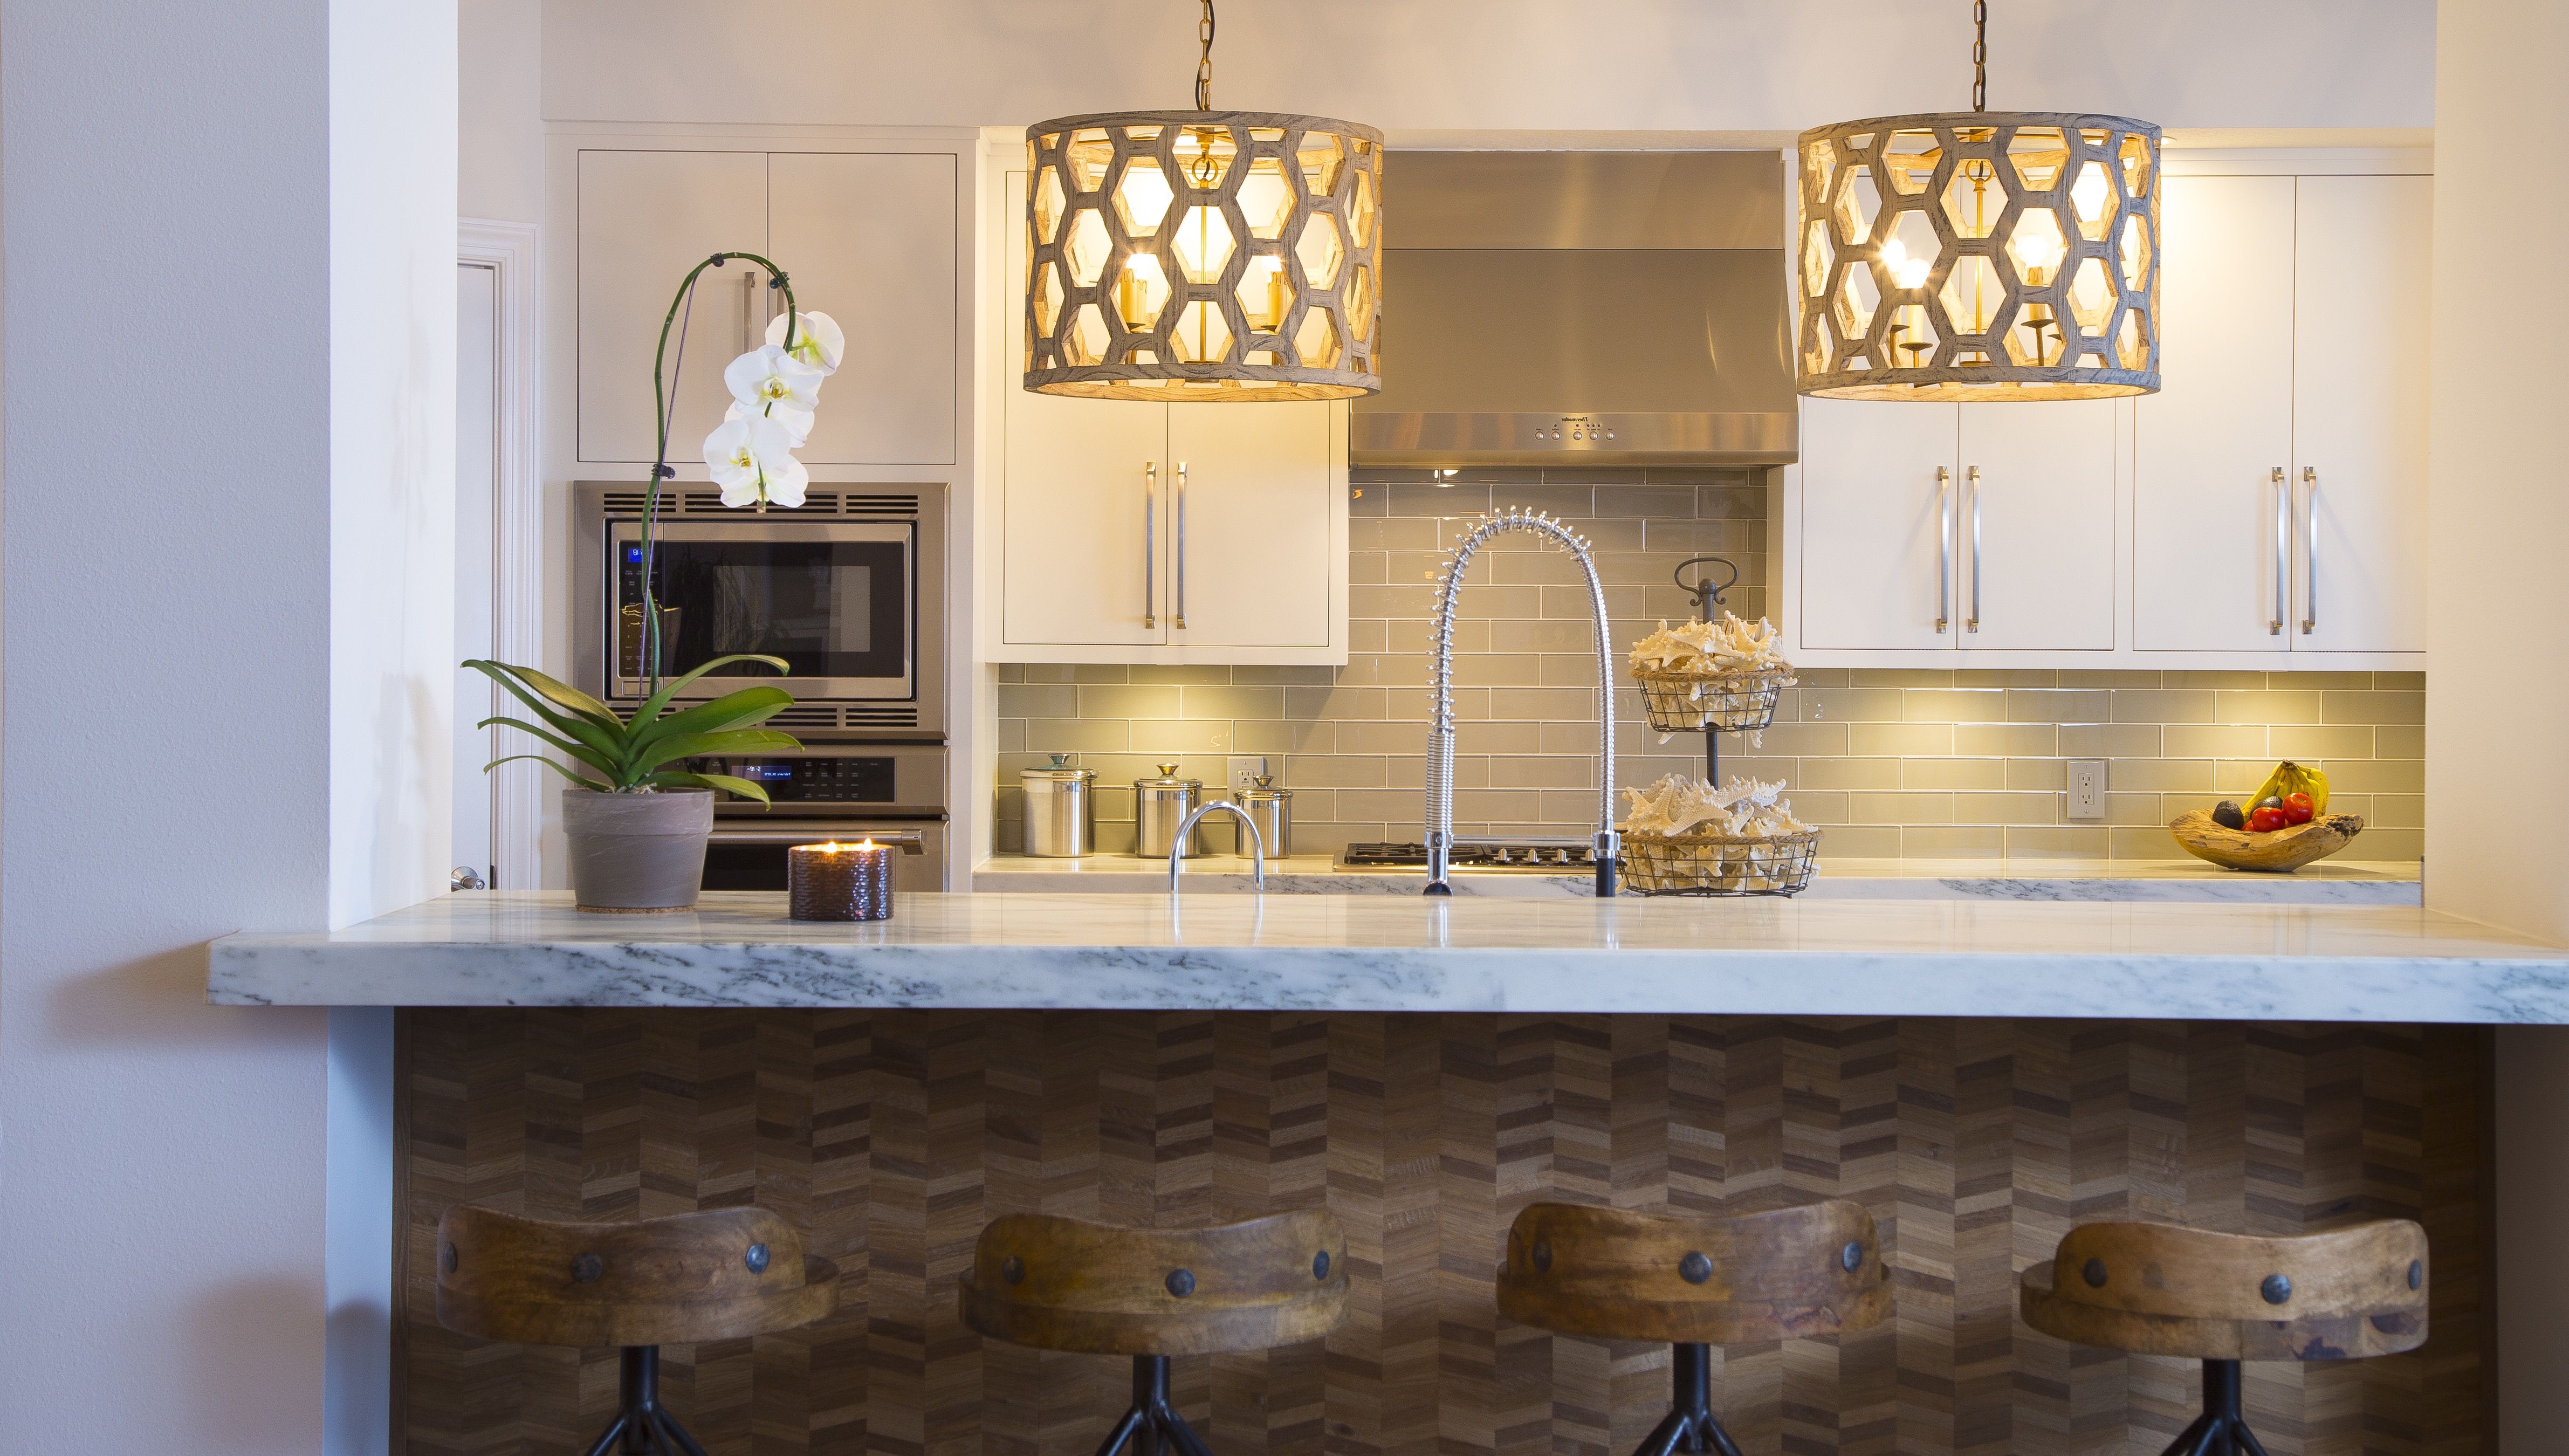 Contemporary Small Kitchen With Beauty Lighting (View 21 of 24)